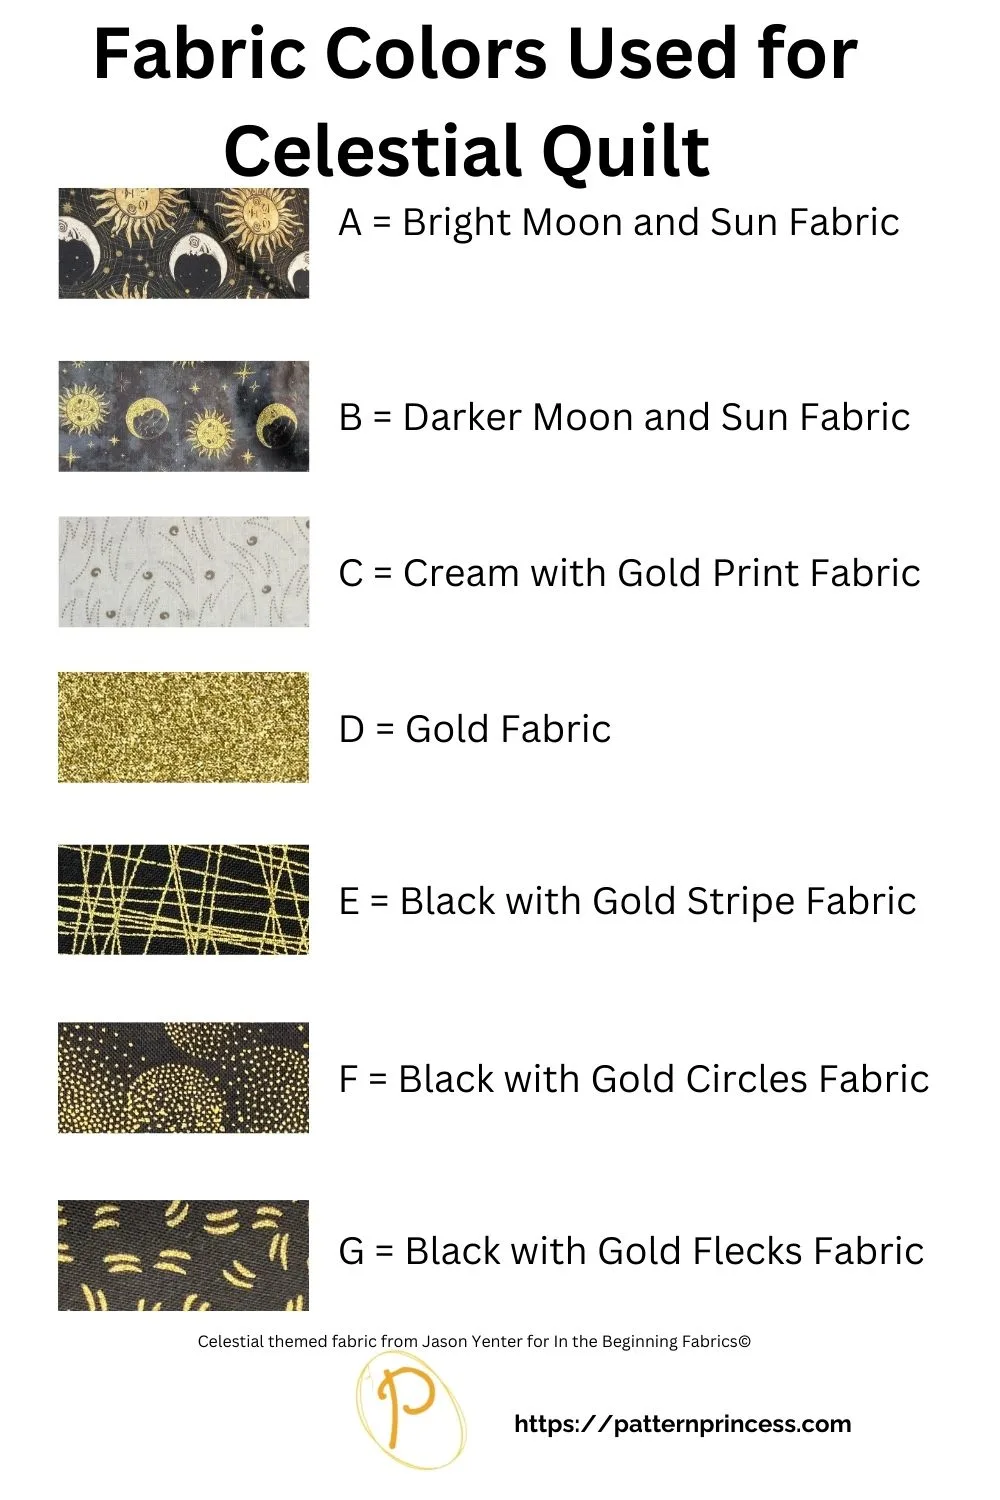 Fabric Colors Used for Celestial Quilt